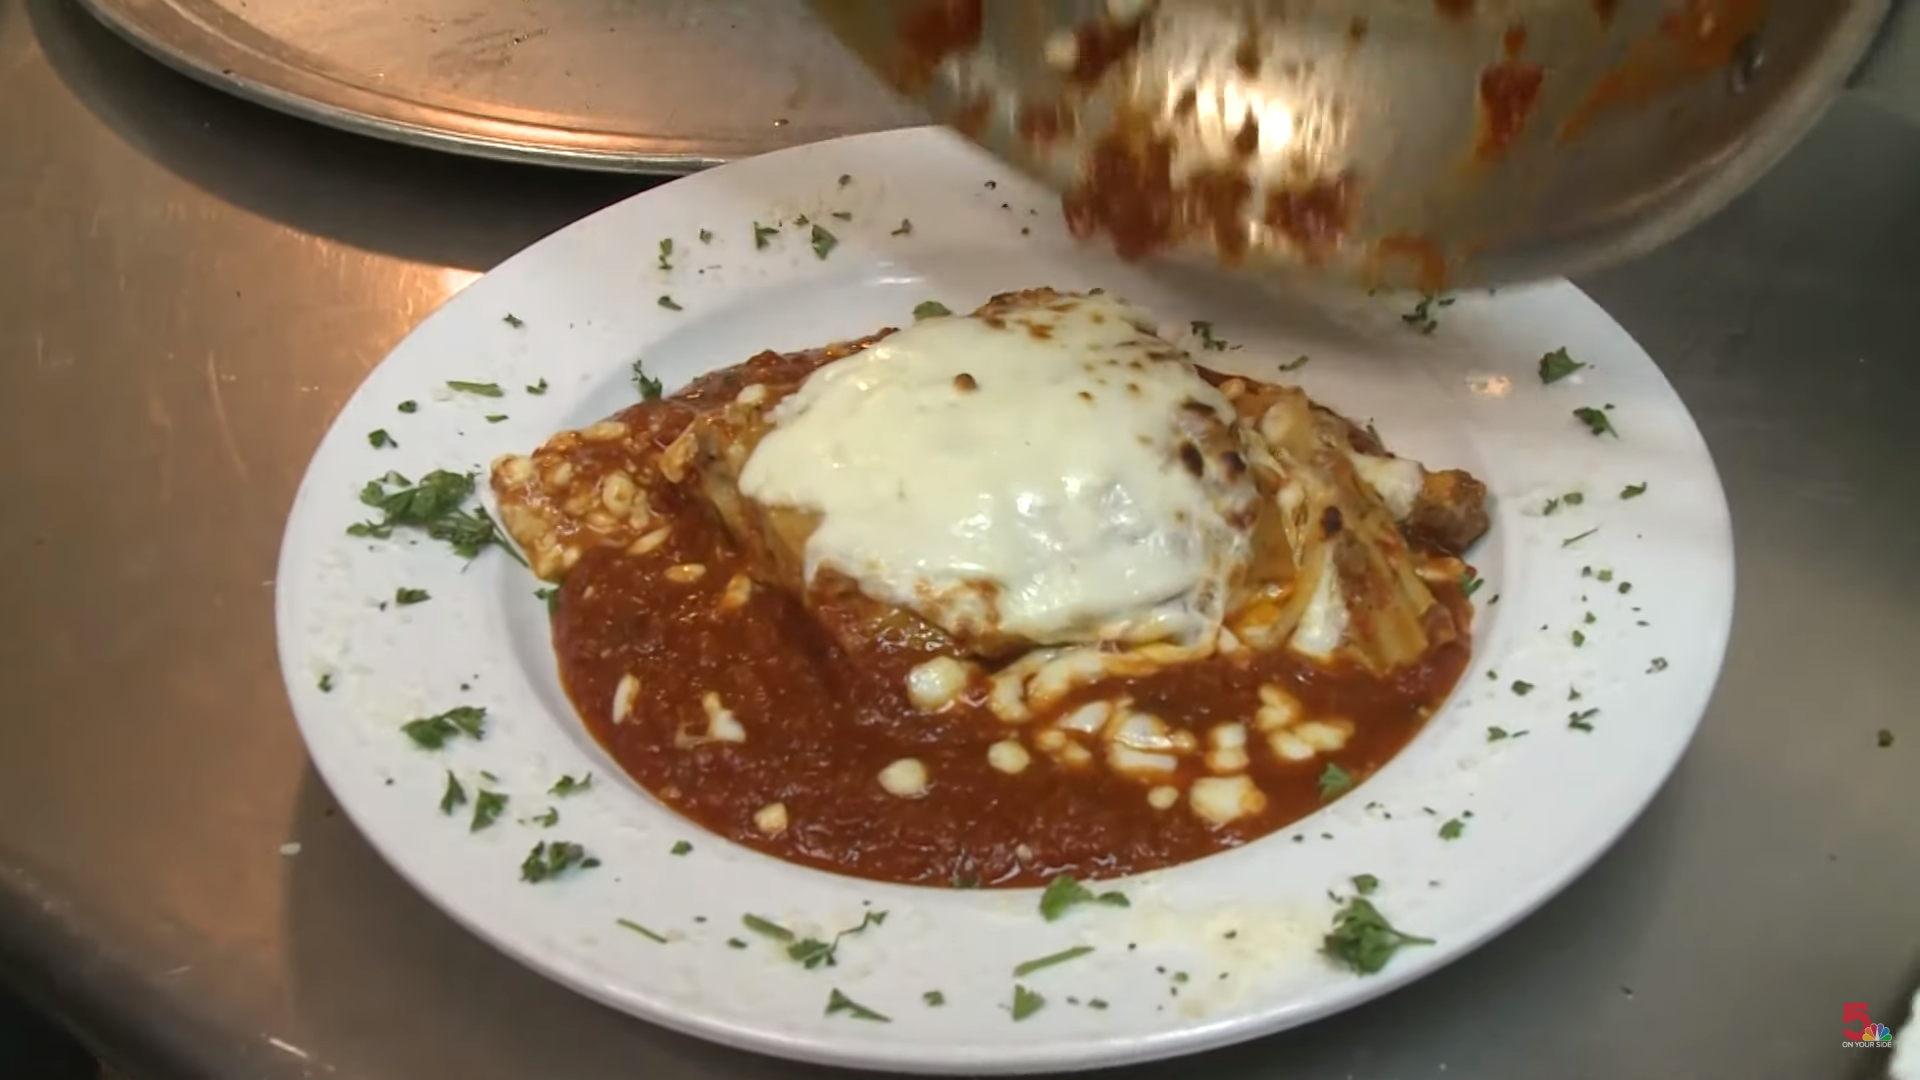 Frank Cusumano stopped at Vito's for this week's food pick.